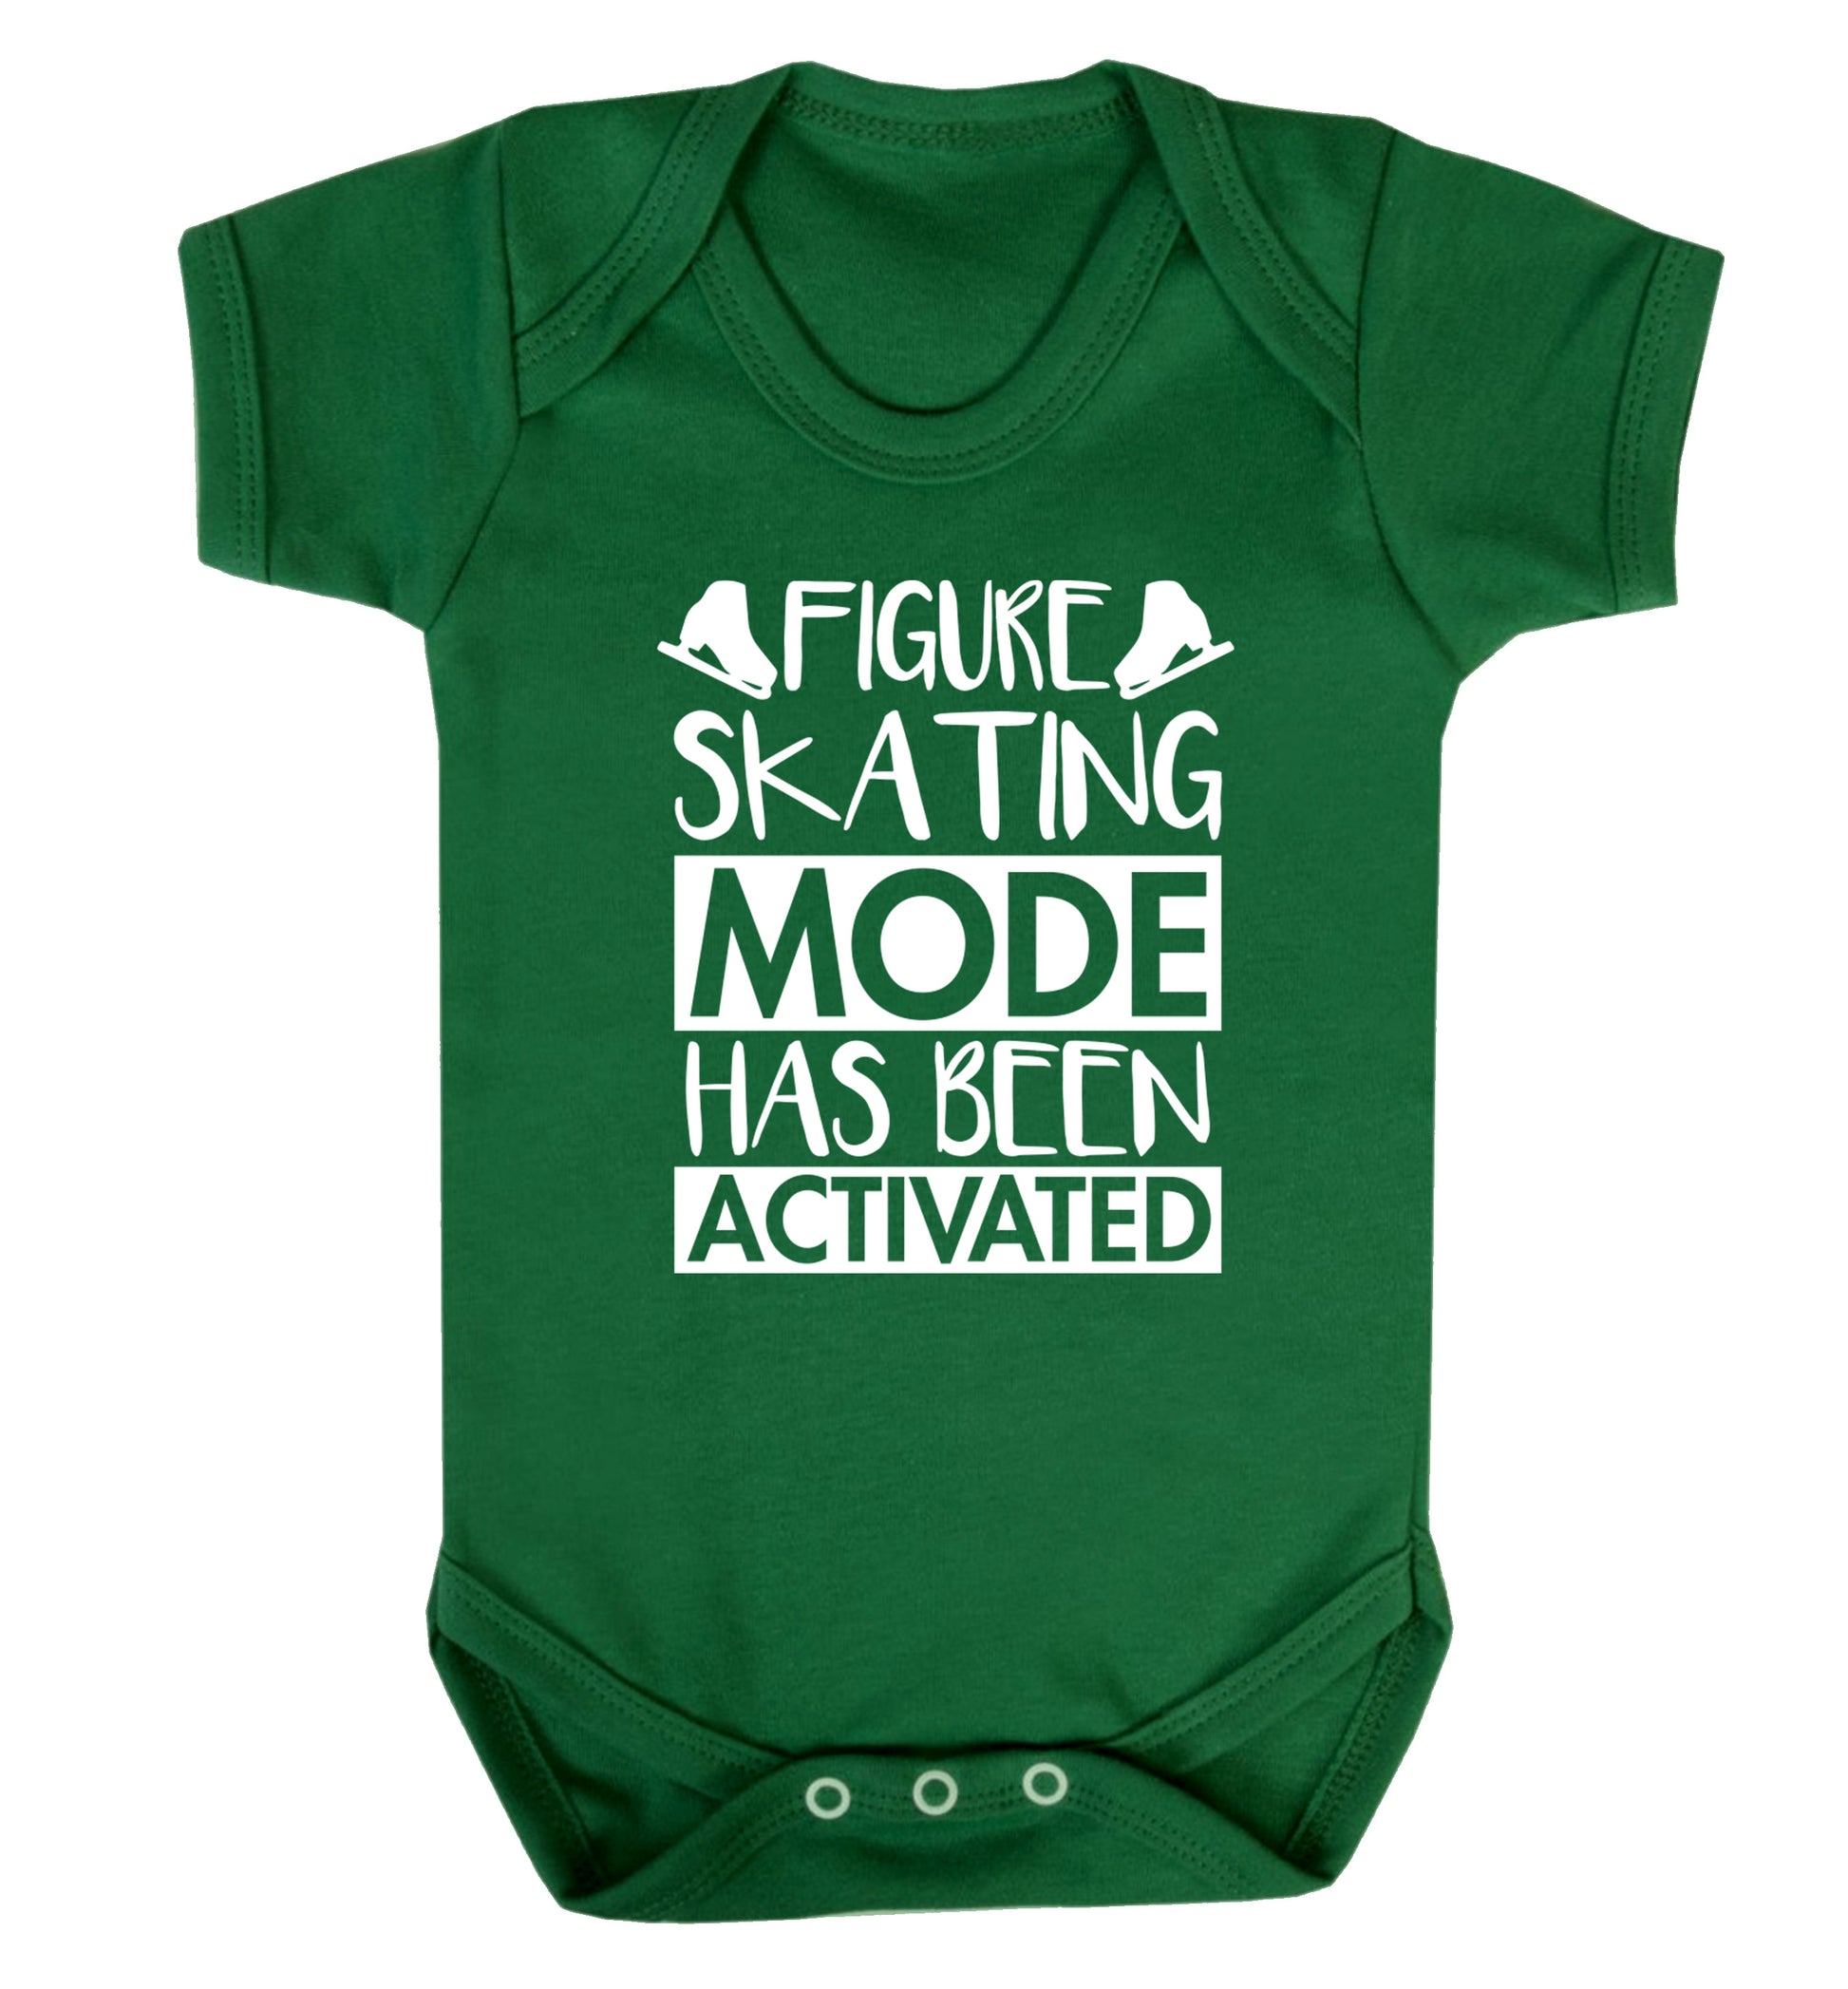 Figure skating mode activated Baby Vest green 18-24 months